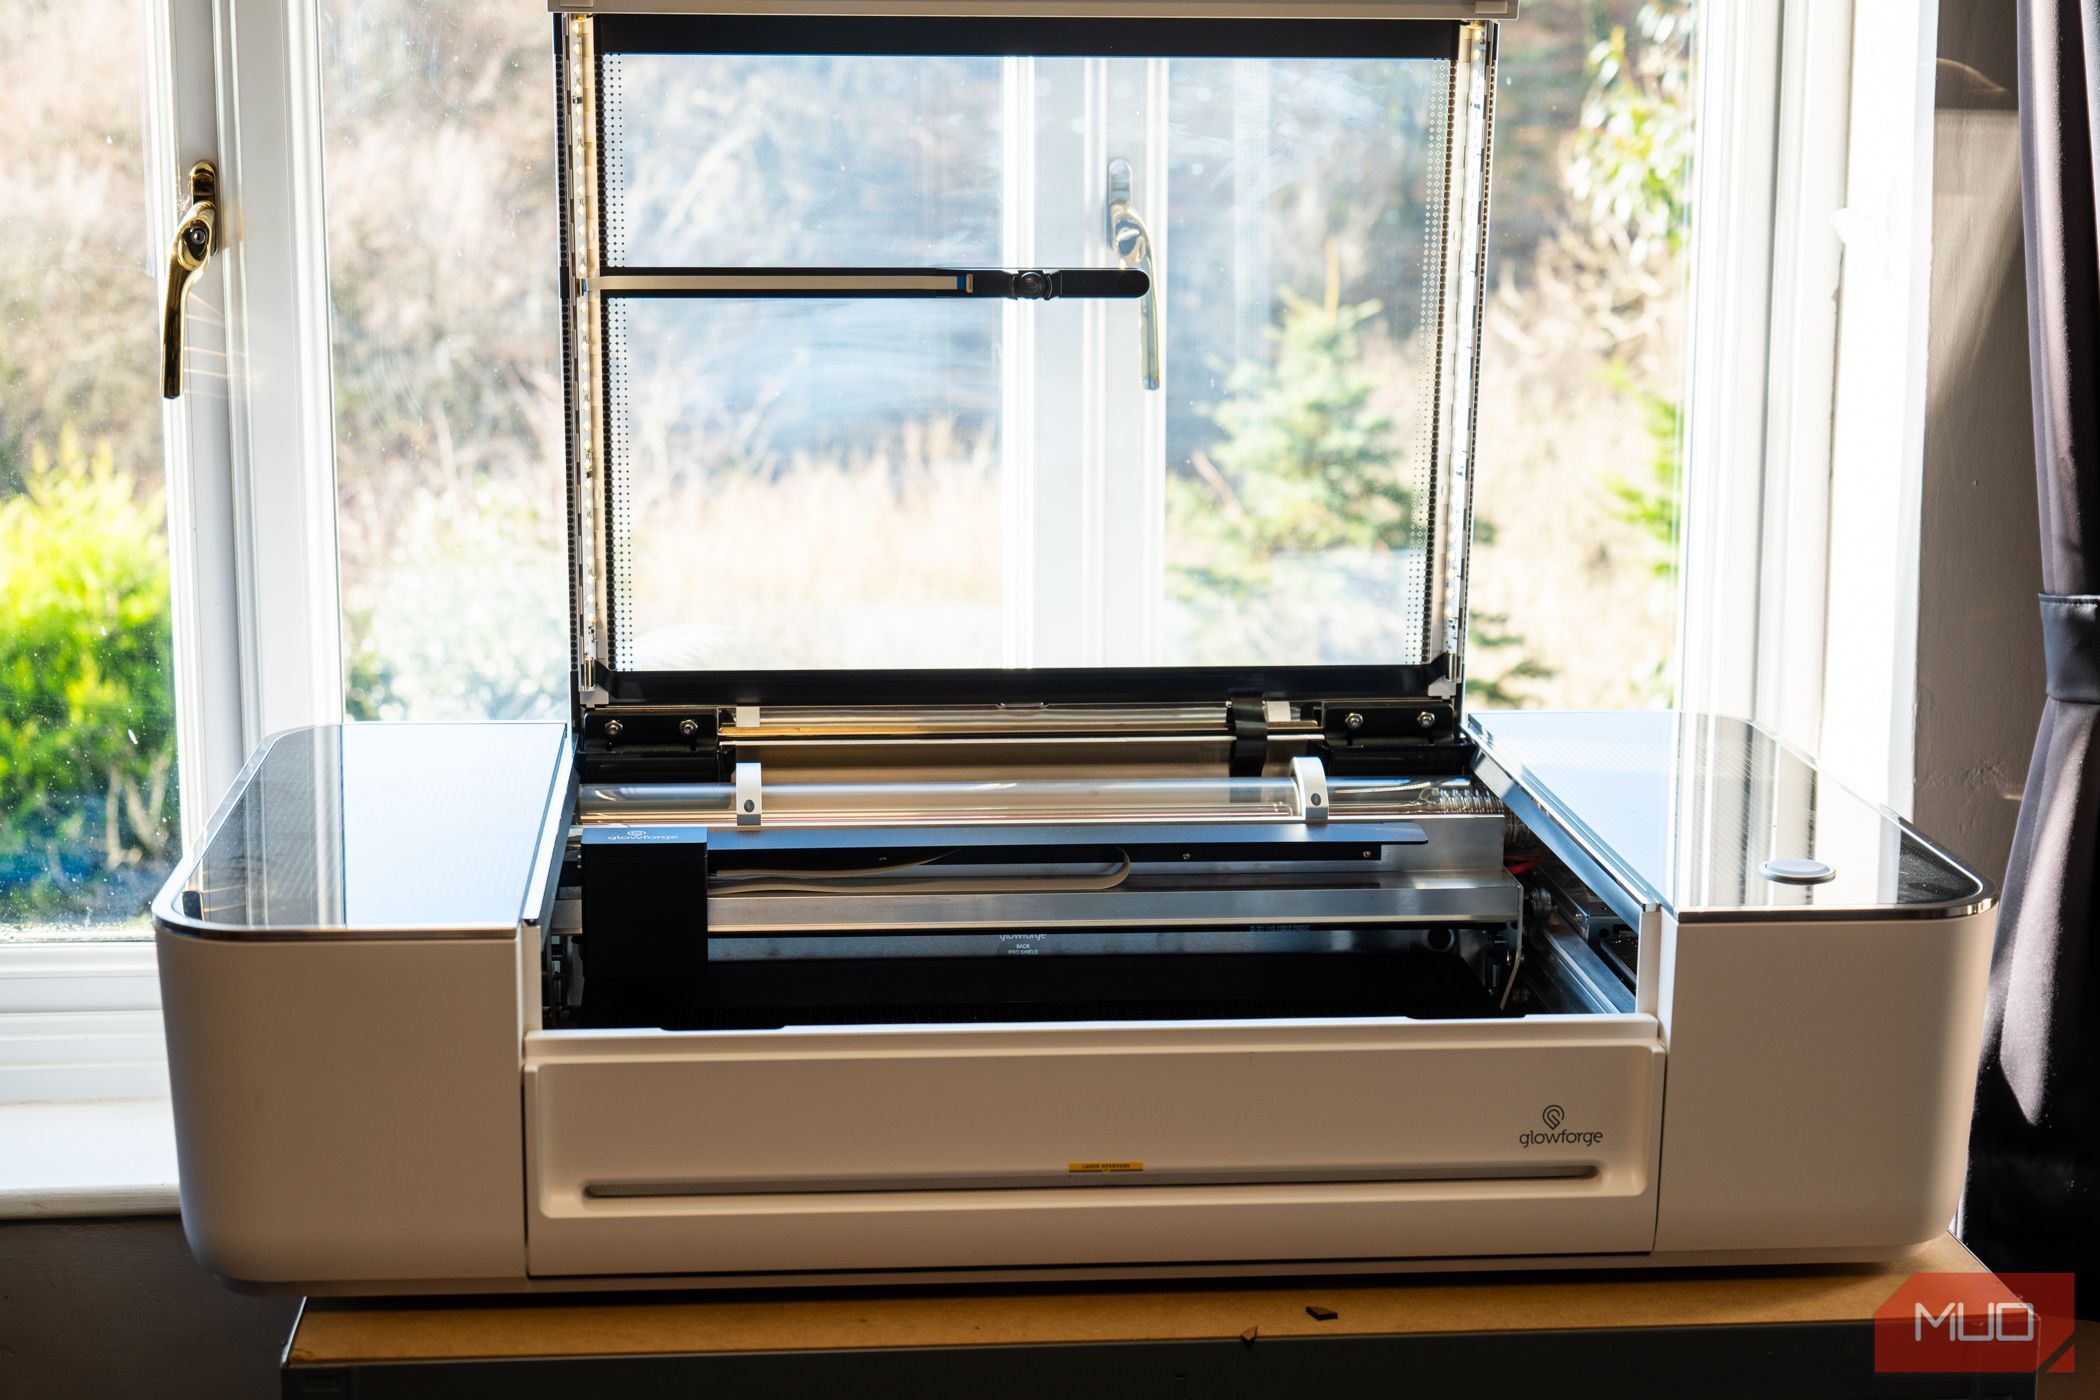 glowforge pro - featured front view